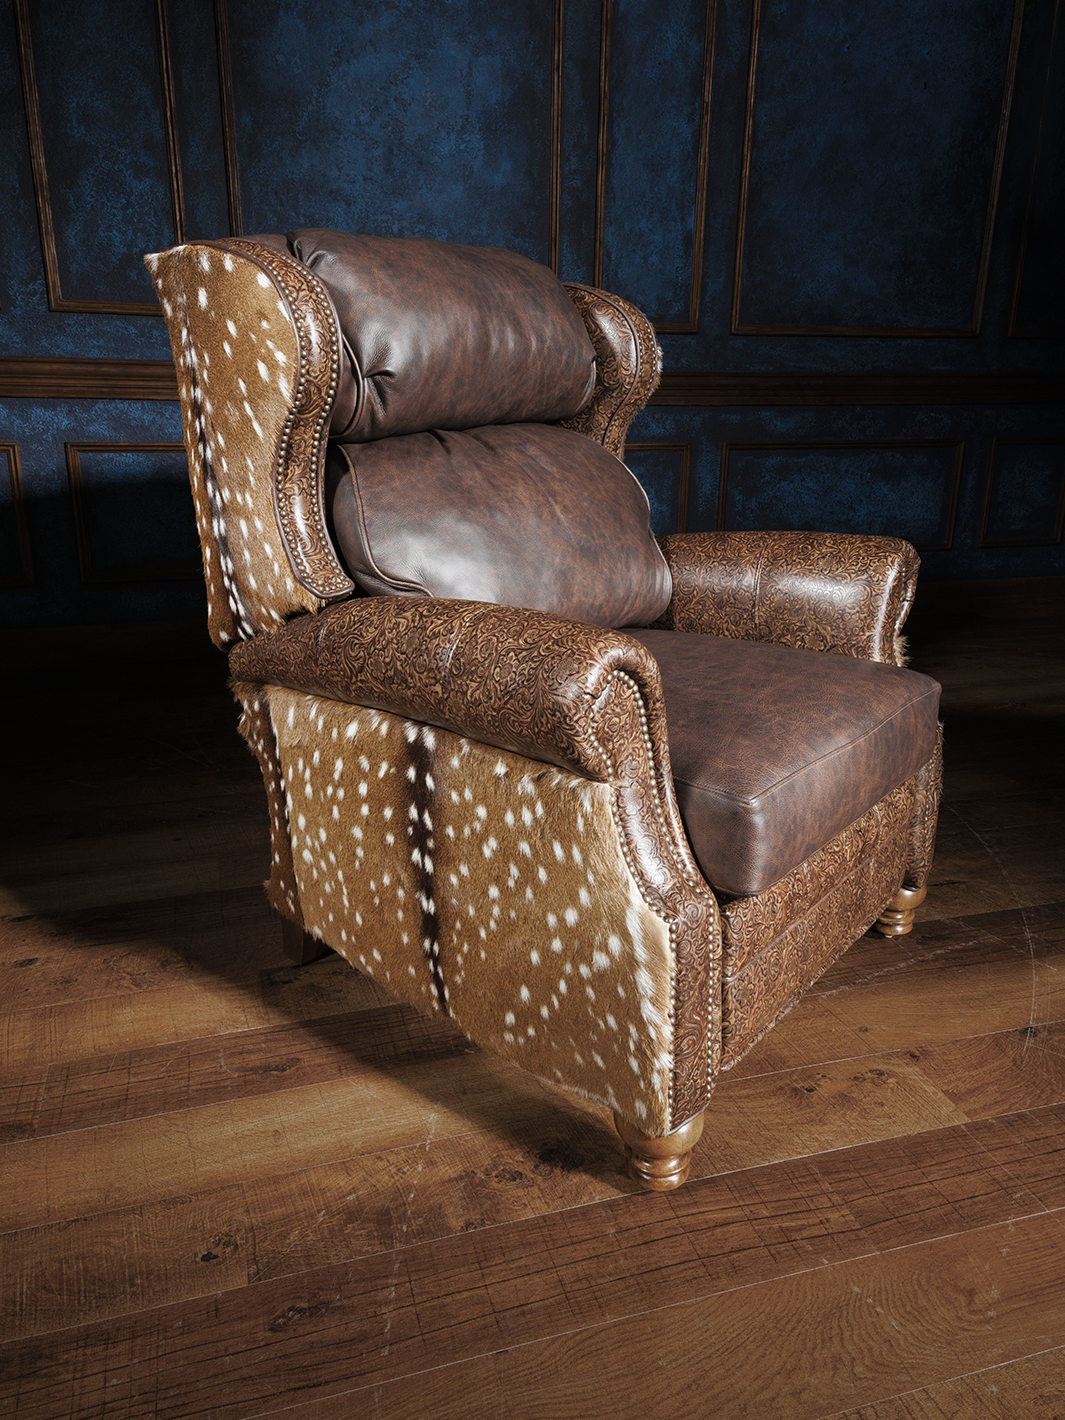 West Chocolate Leather & Axis Recliner